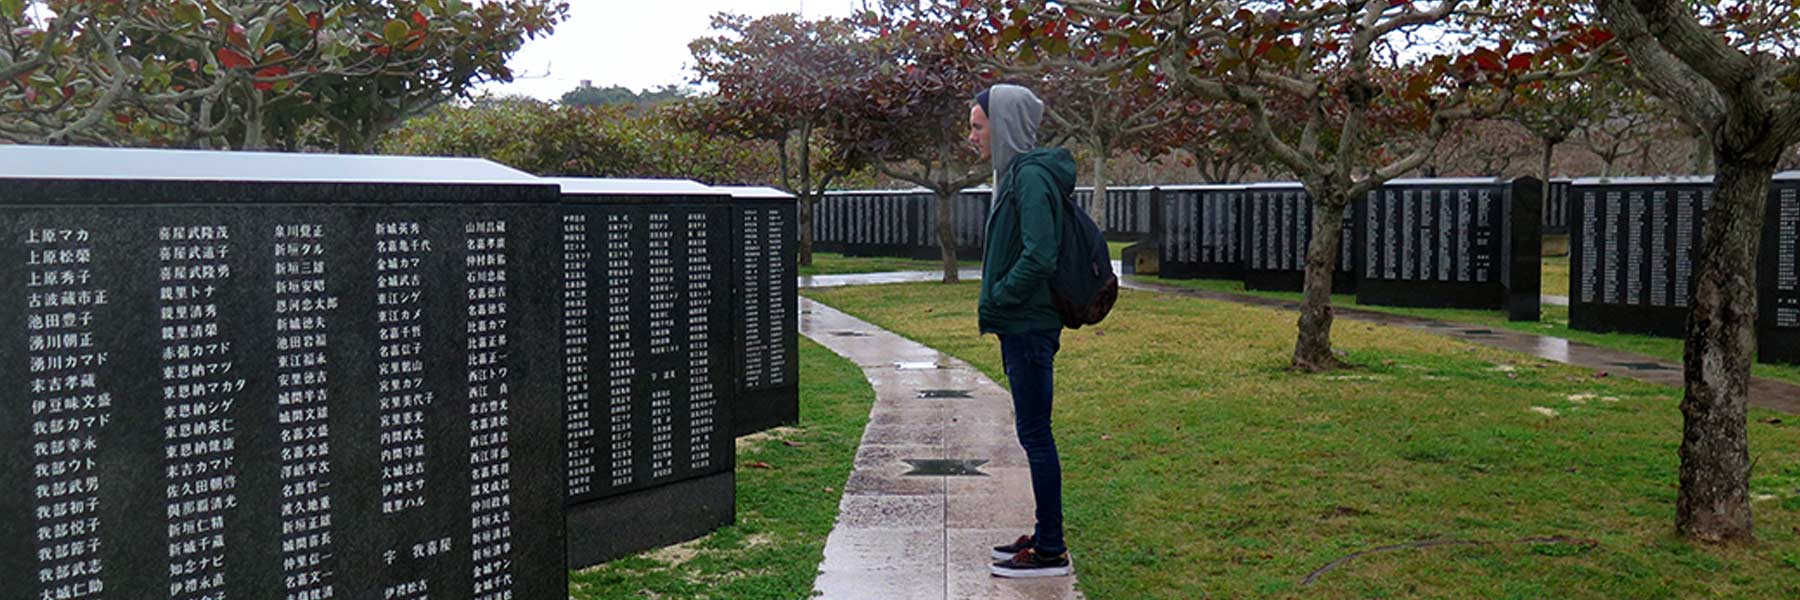 A student stands in front of a war memorial.